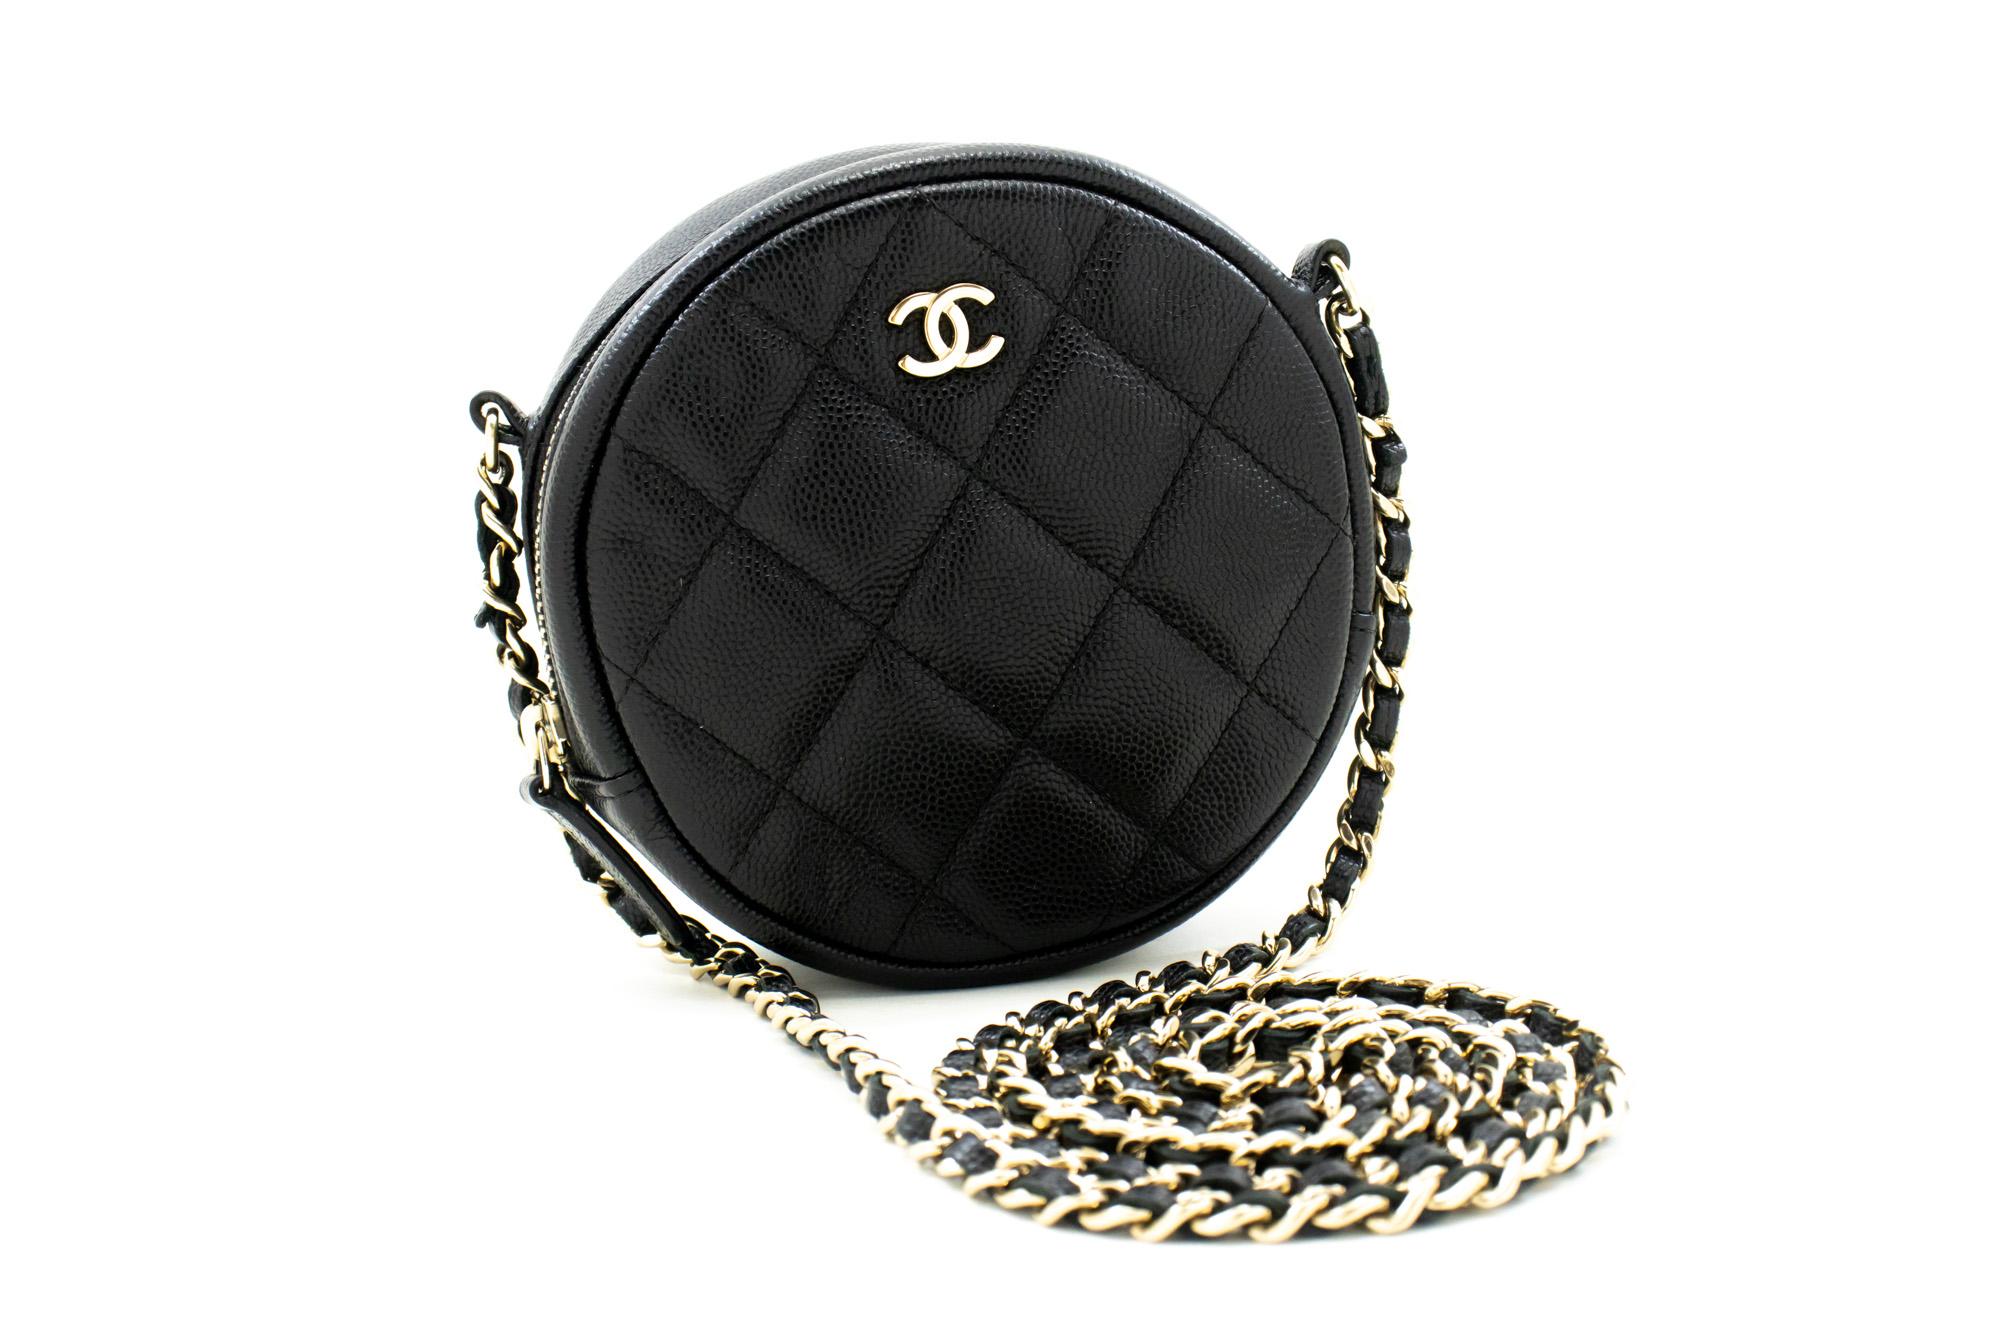 An authentic CHANEL Round Zip Caviar Small Chain Shoulder Bag Black Quilted. The color is Black. The outside material is Leather. The pattern is Solid. This item is Contemporary. The year of manufacture would be 2017.
Conditions & Ratings
Outside